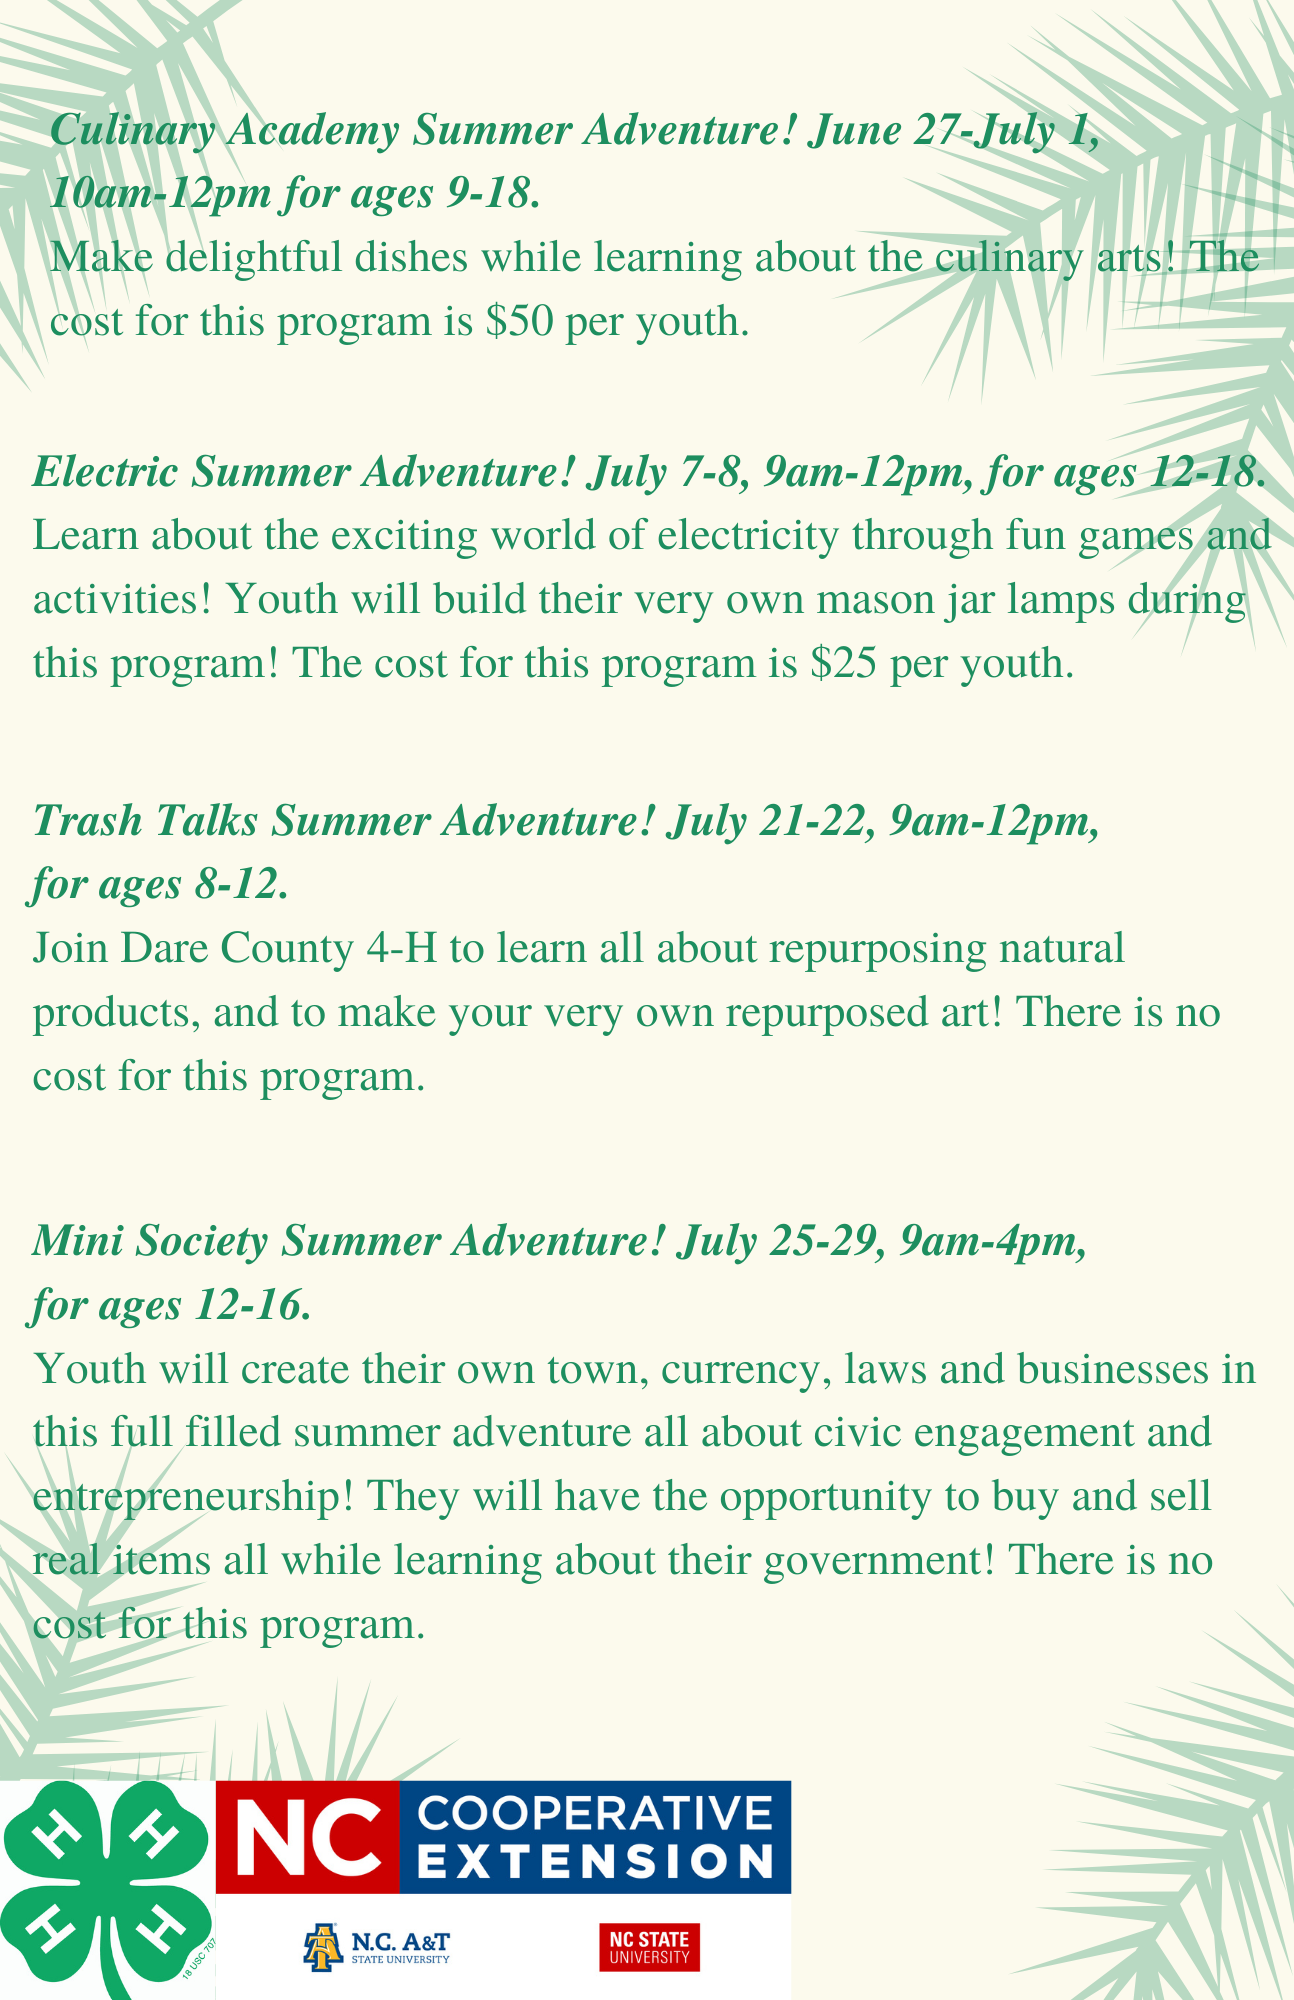 page 2 of the Summer Adventures flier